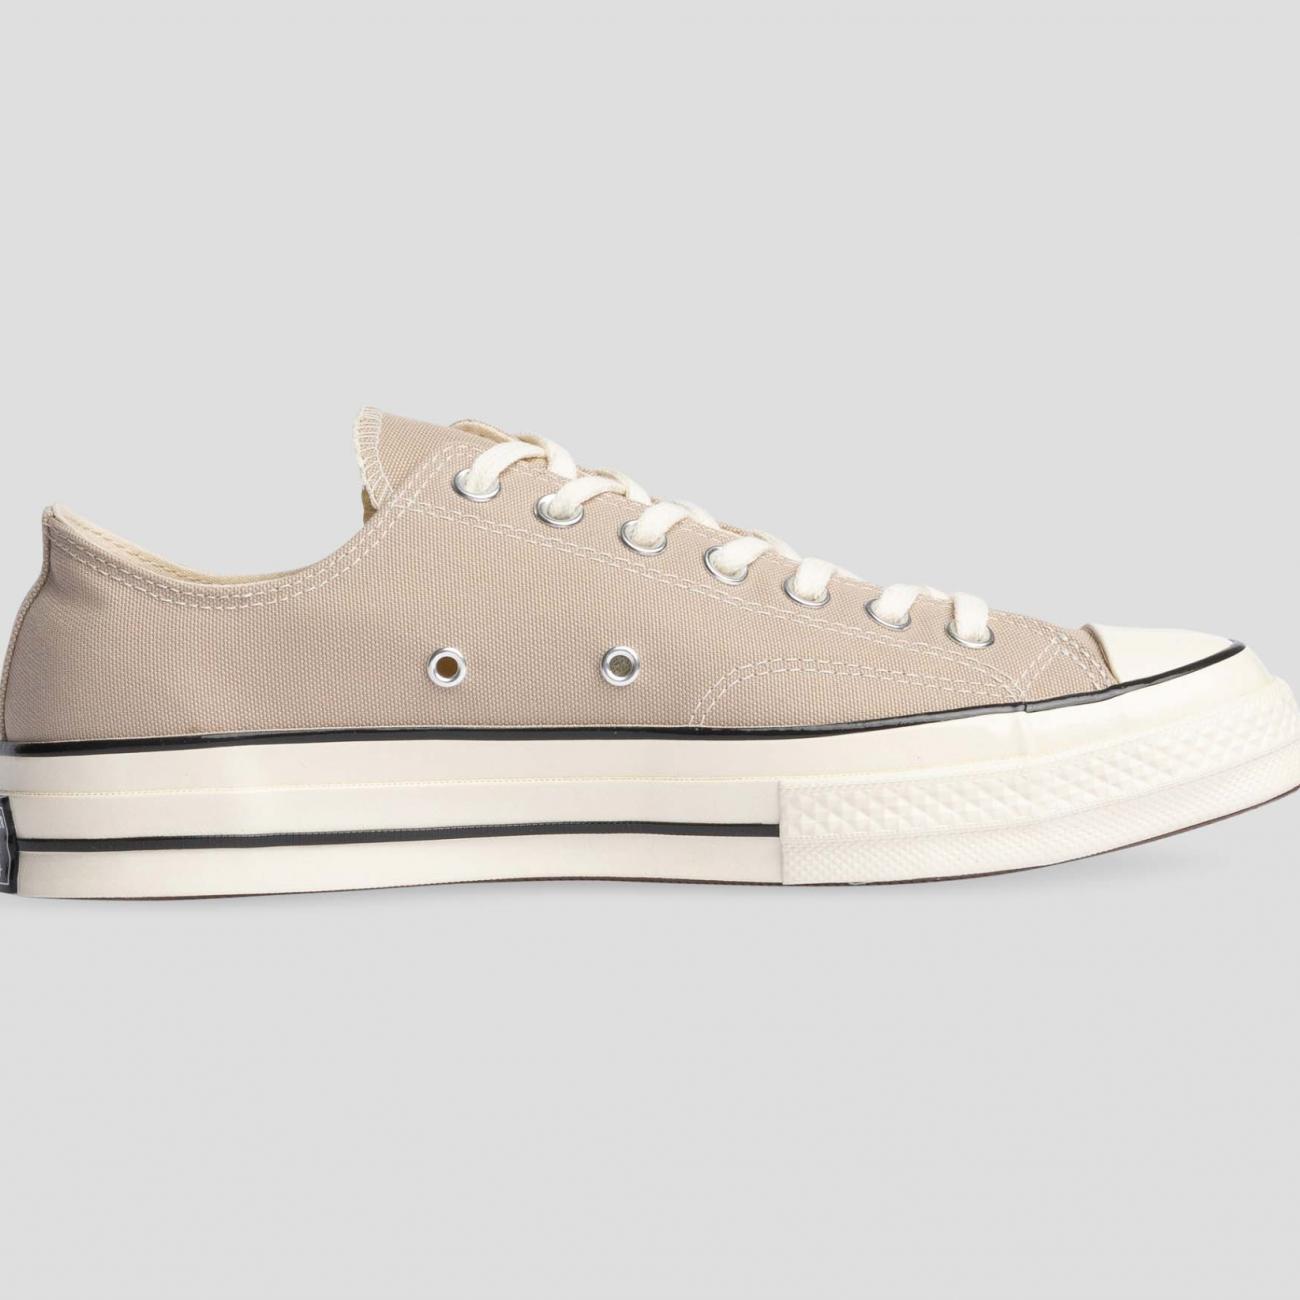 Unisex Converse Chuck 70 Recycled Canvas Seasonal Colour Low Top Papyrus